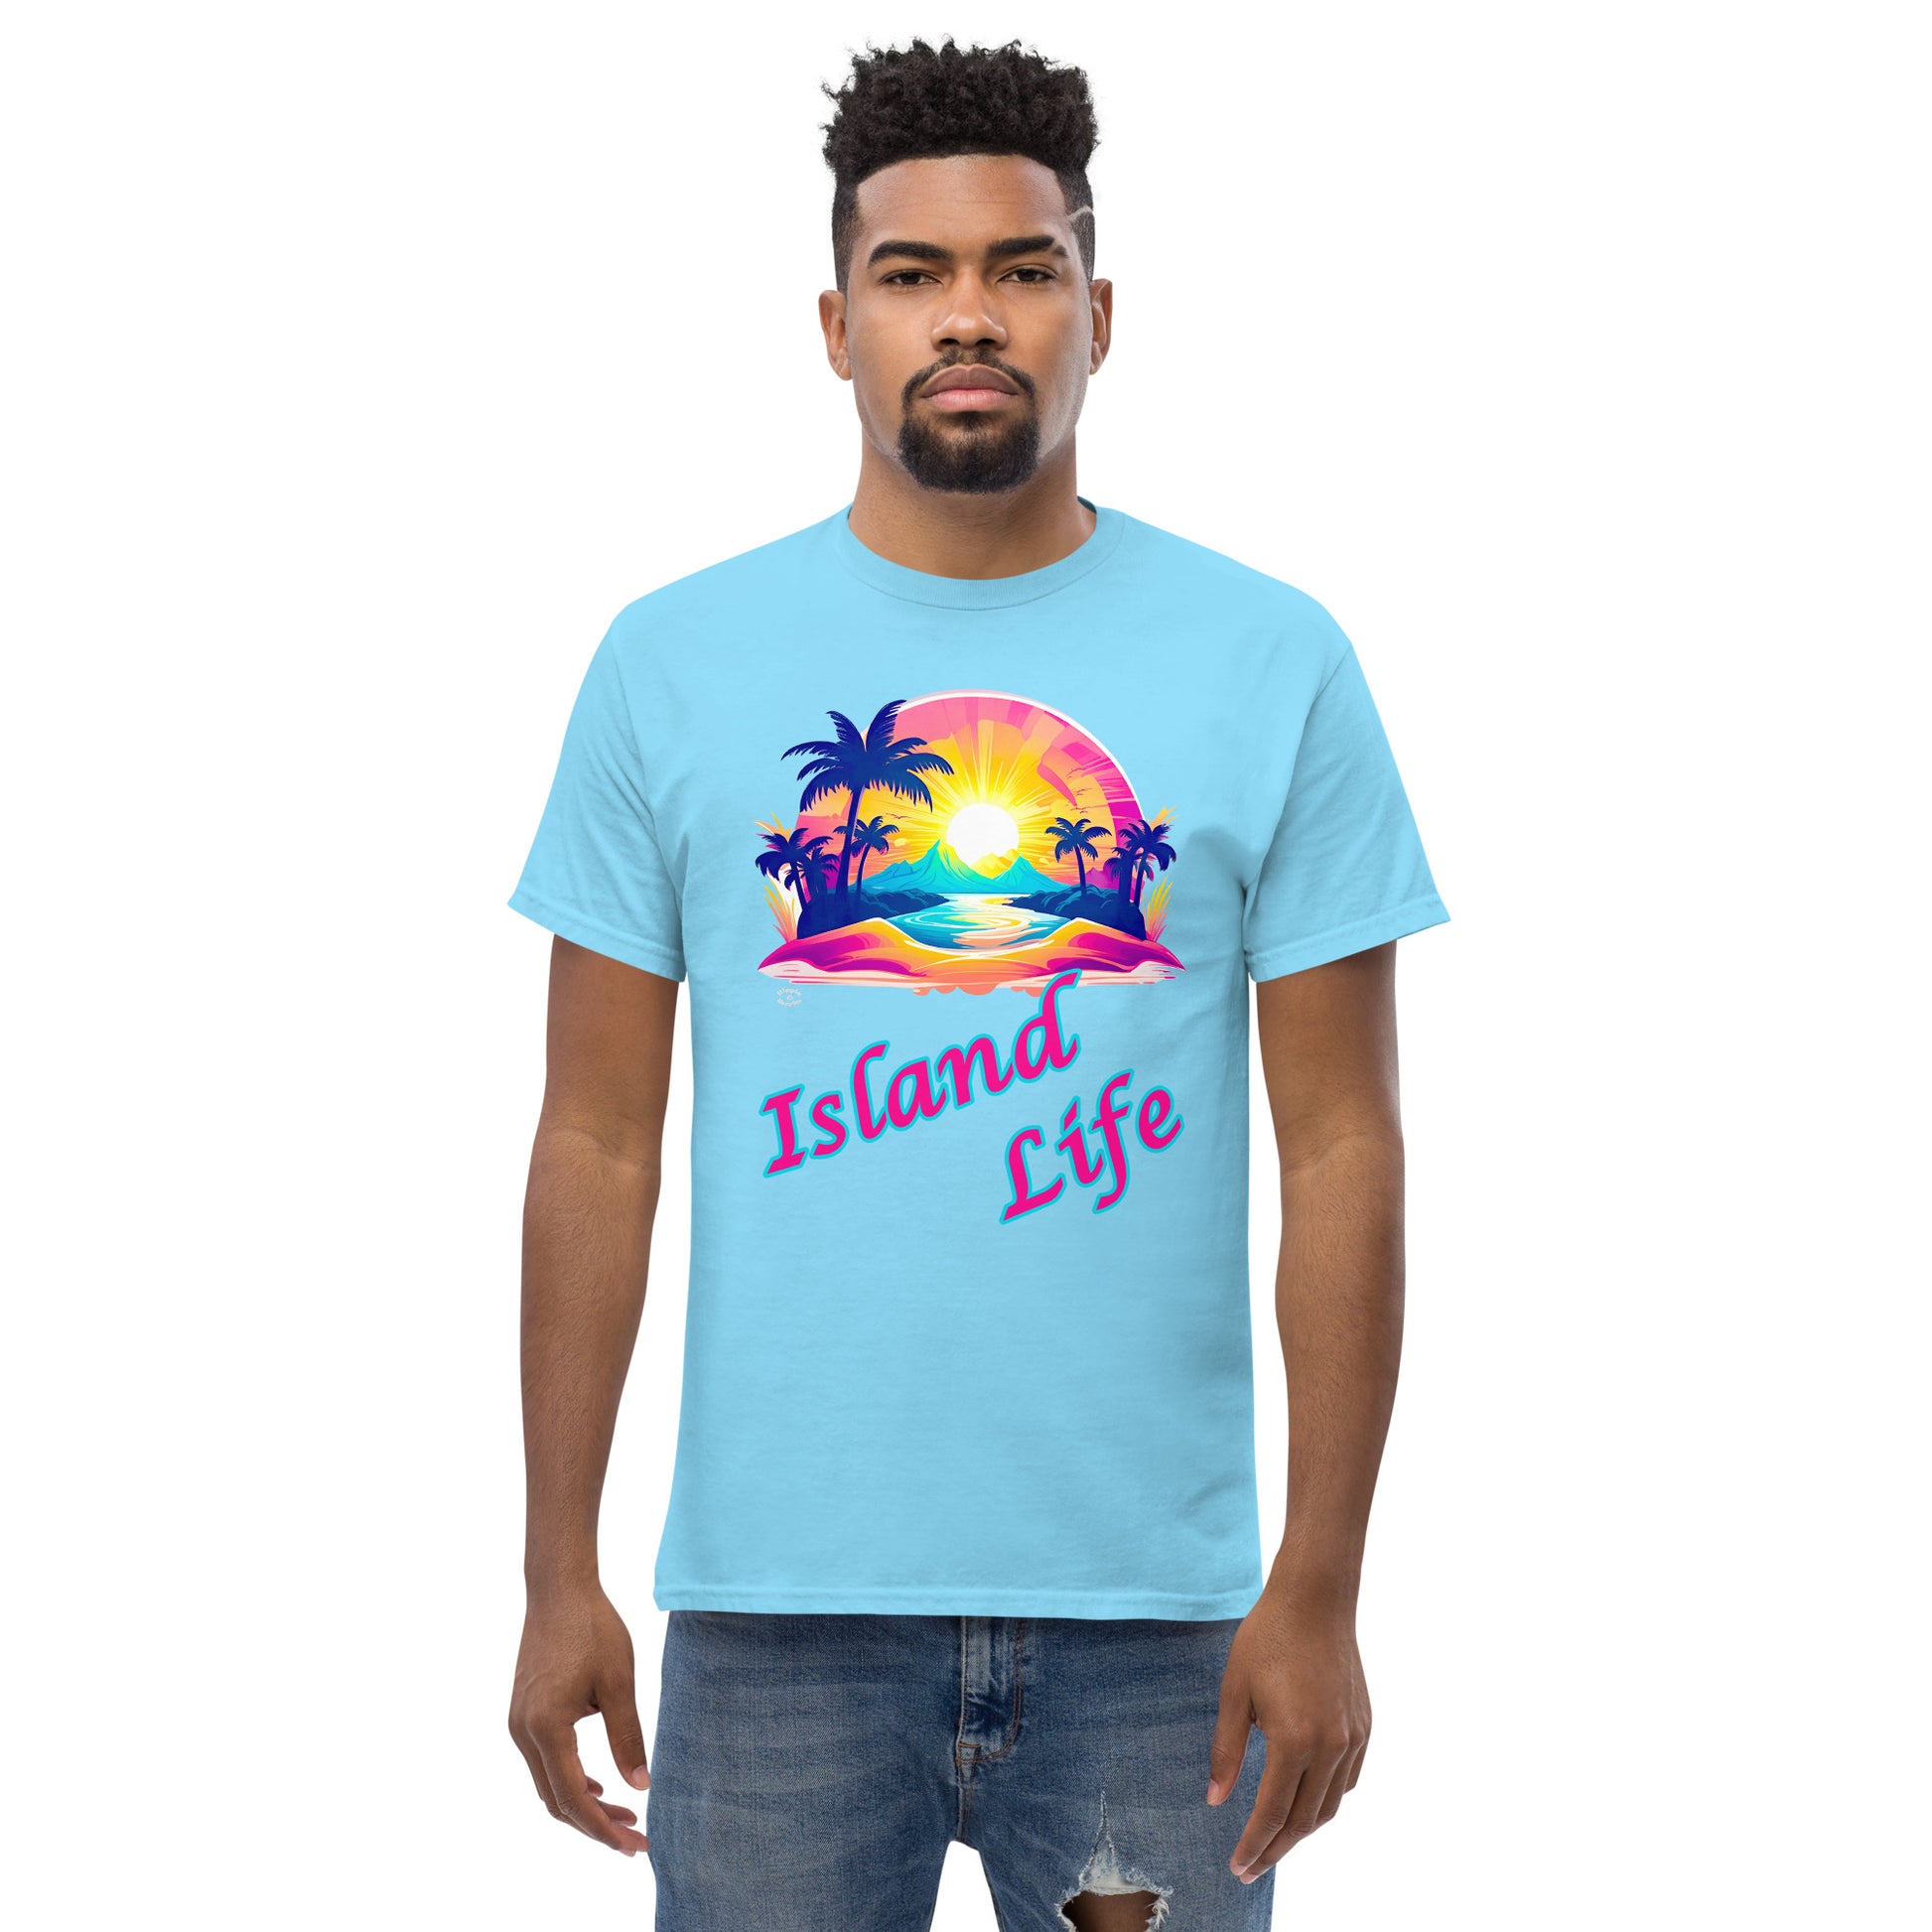 A picture of a man modeling a Men's Classic Tee / Tshirt with a large picture on the front of a tropical island paradise and the text Island Life underneath - front - sky blue